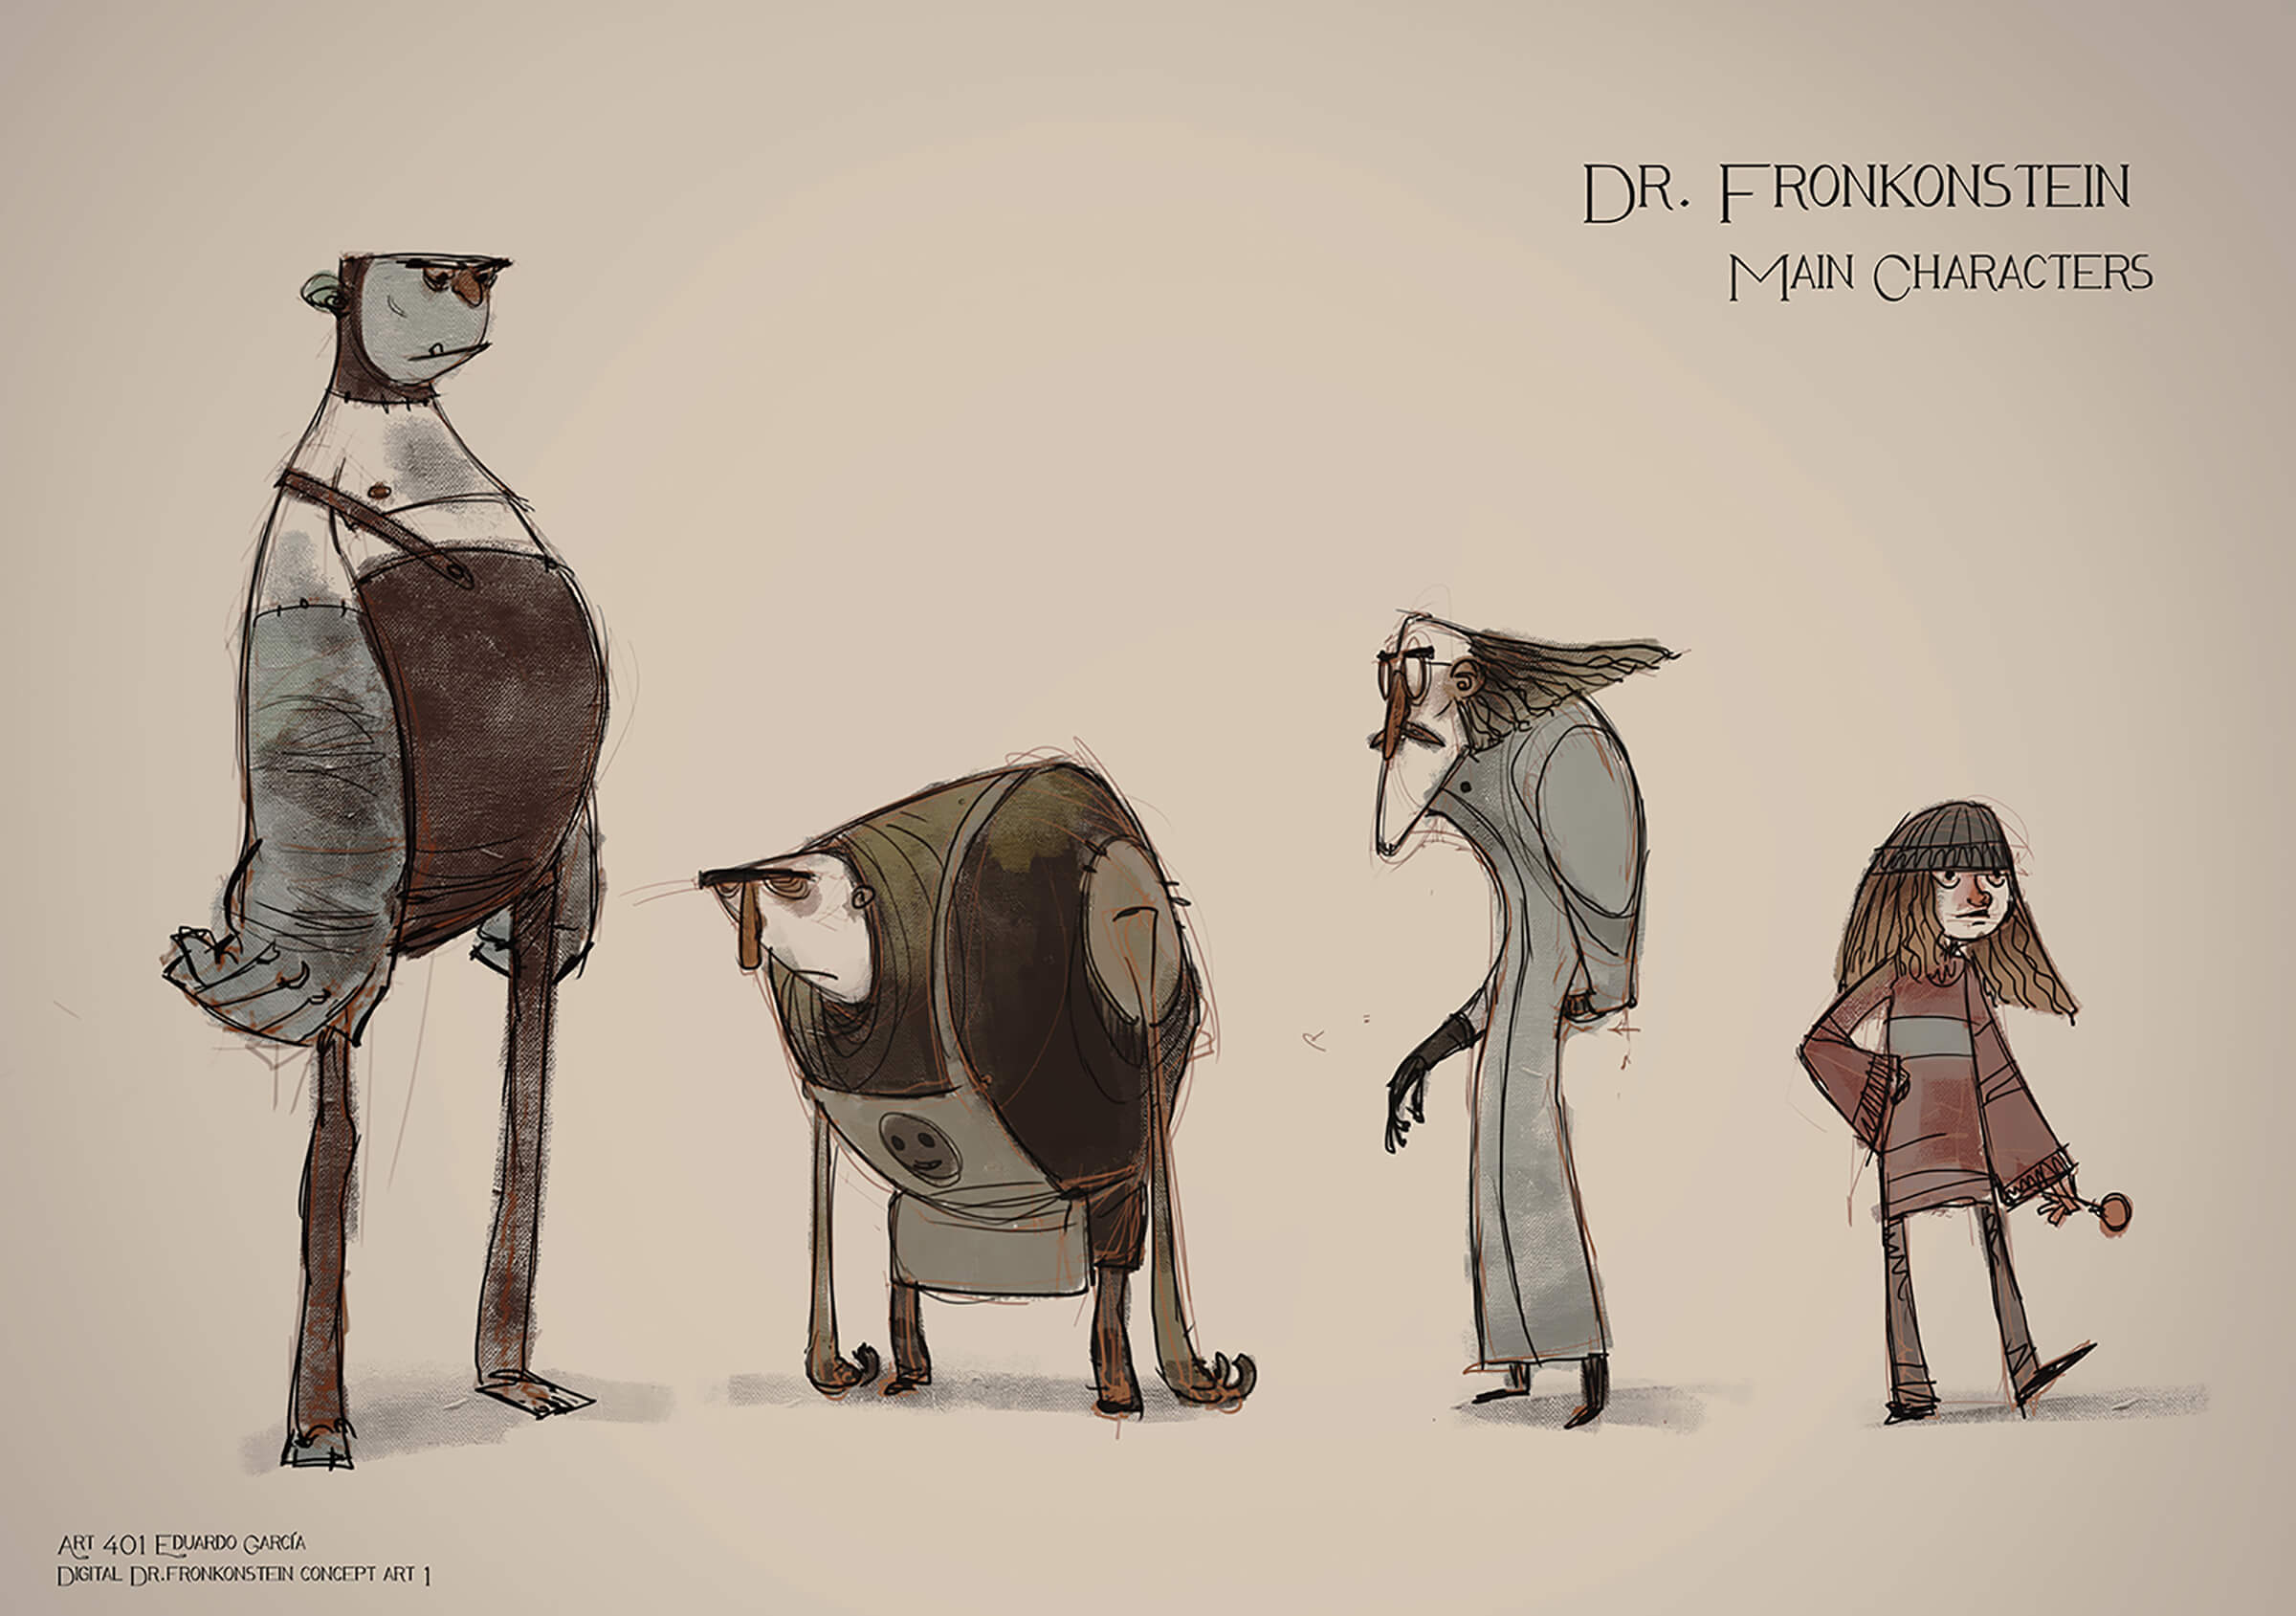 Concept sketches of characters, including a tall monster, hunched-over assistant, mad scientist, and a young, modern girl.